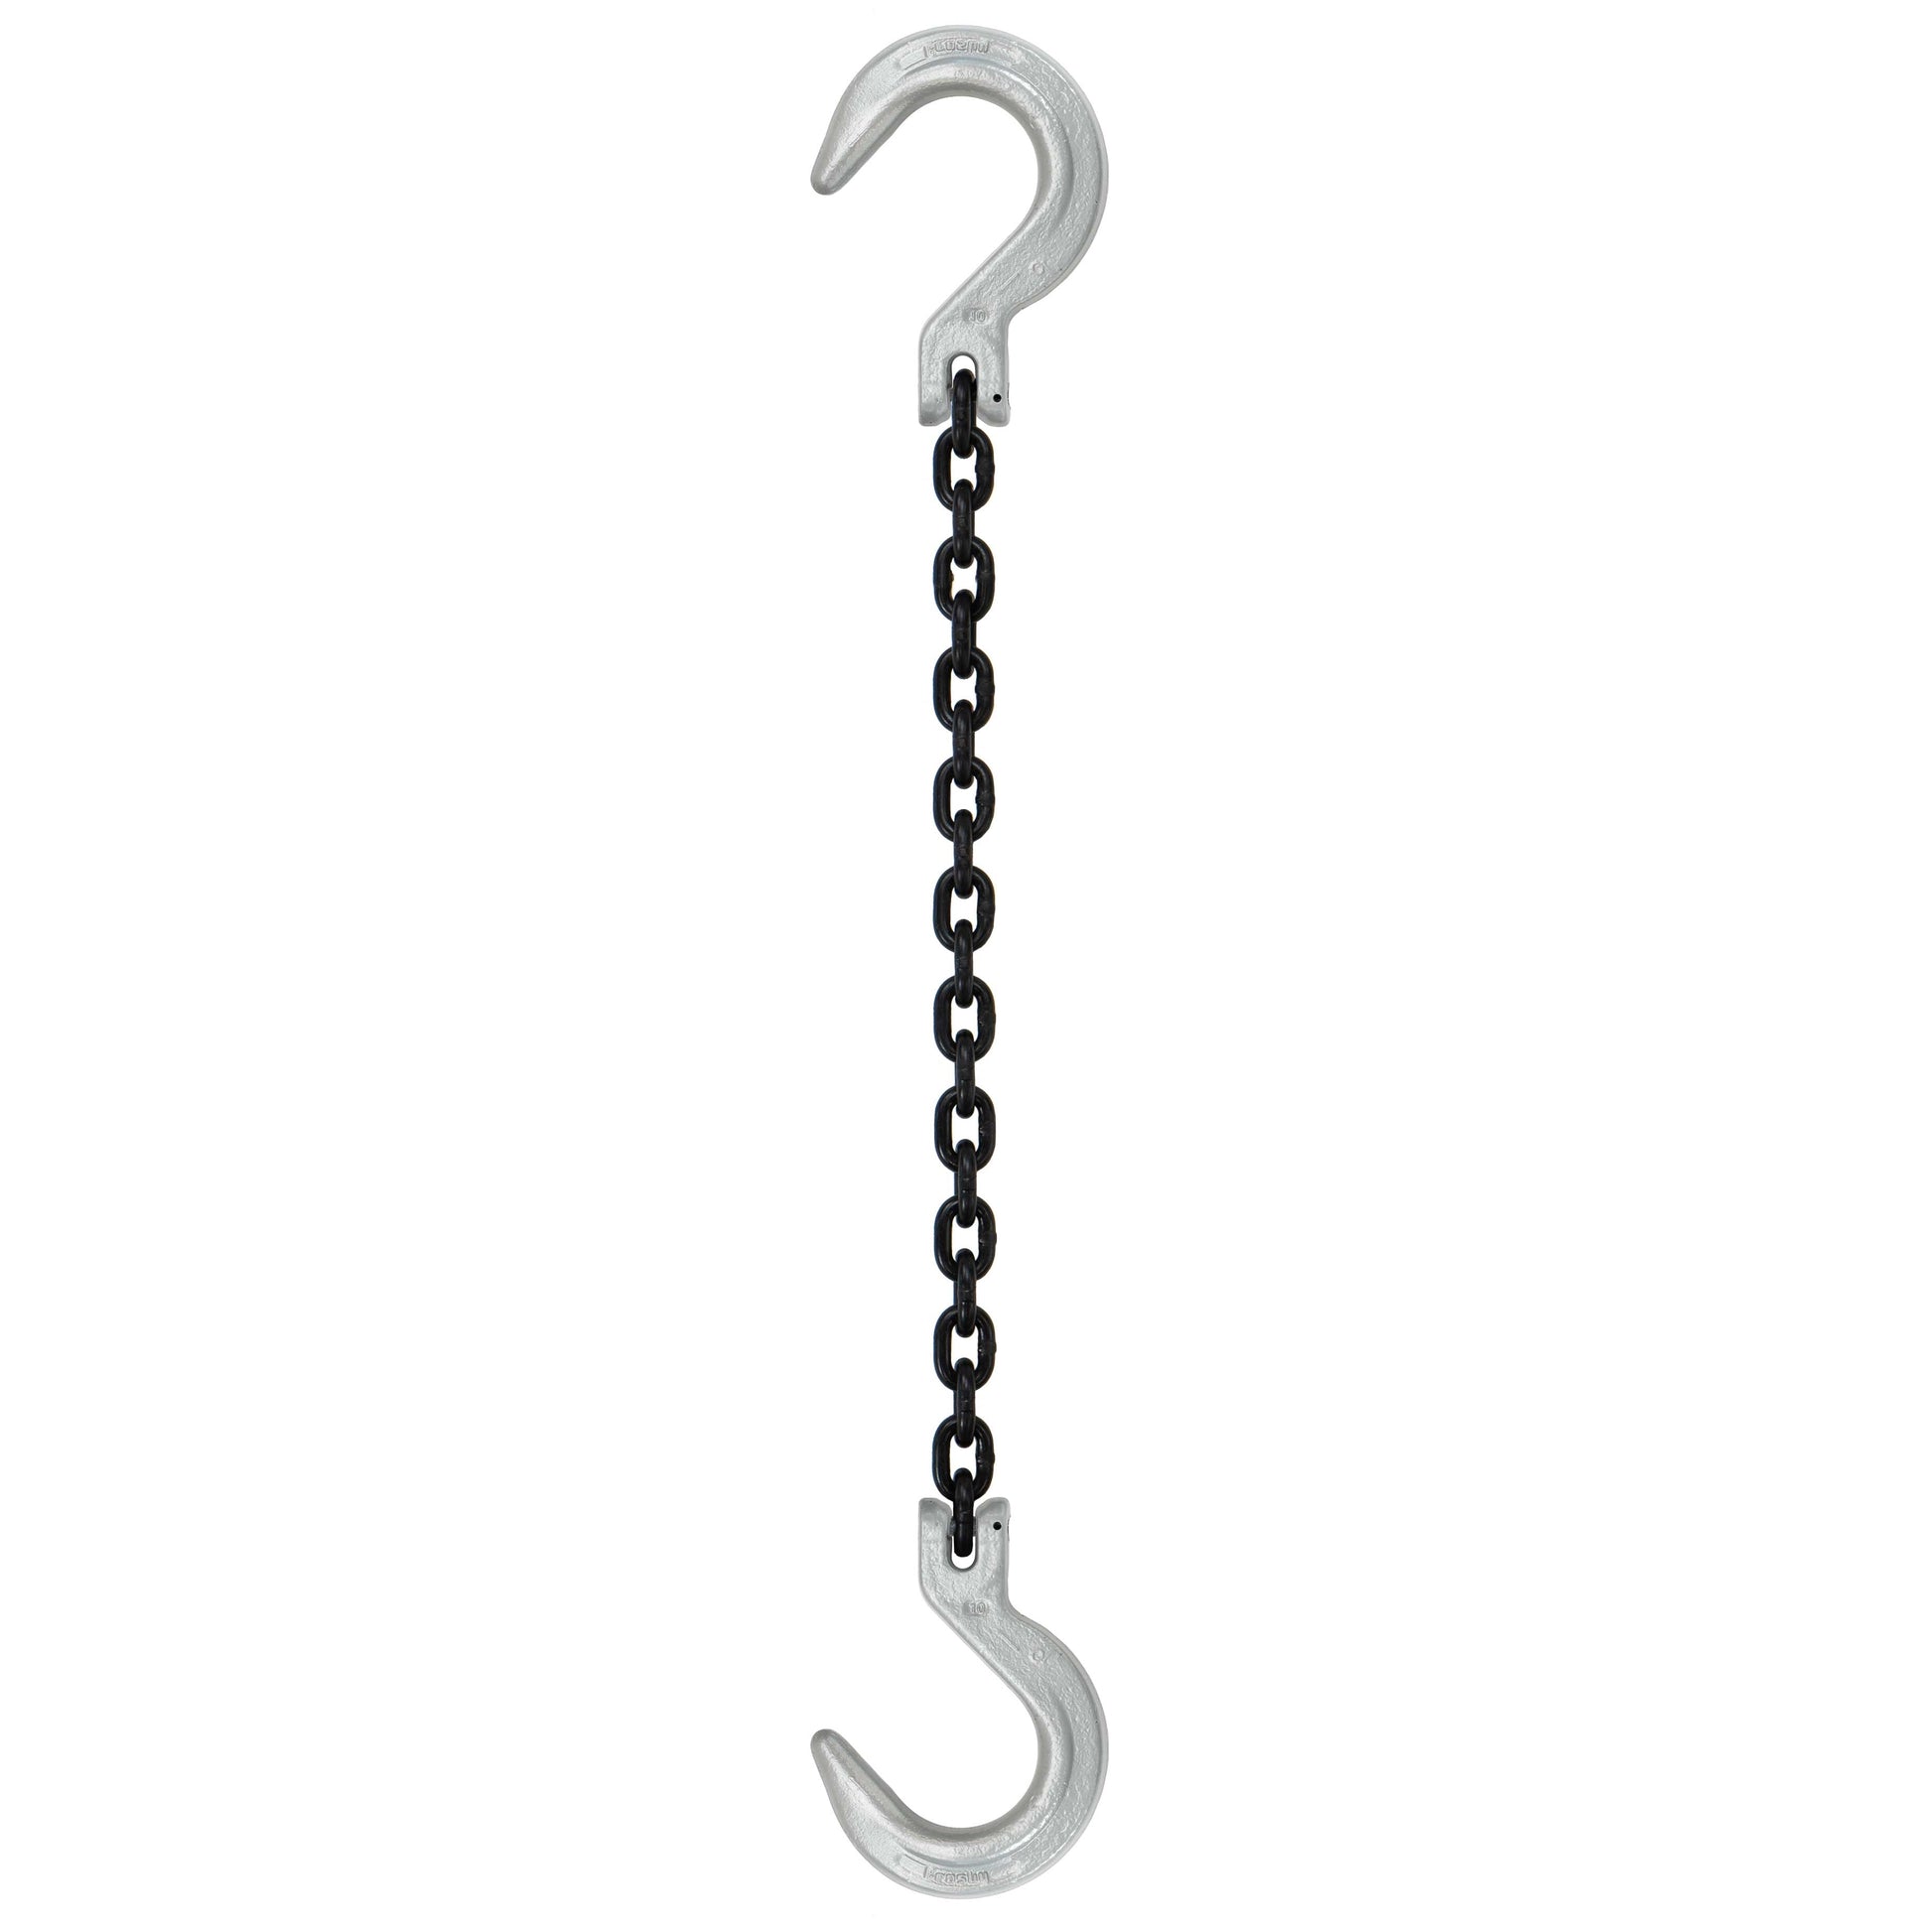 932 inch x 12 foot Domestic Single Leg Chain Sling w Crosby Foundry & Foundry Hooks Grade 100 image 1 of 2